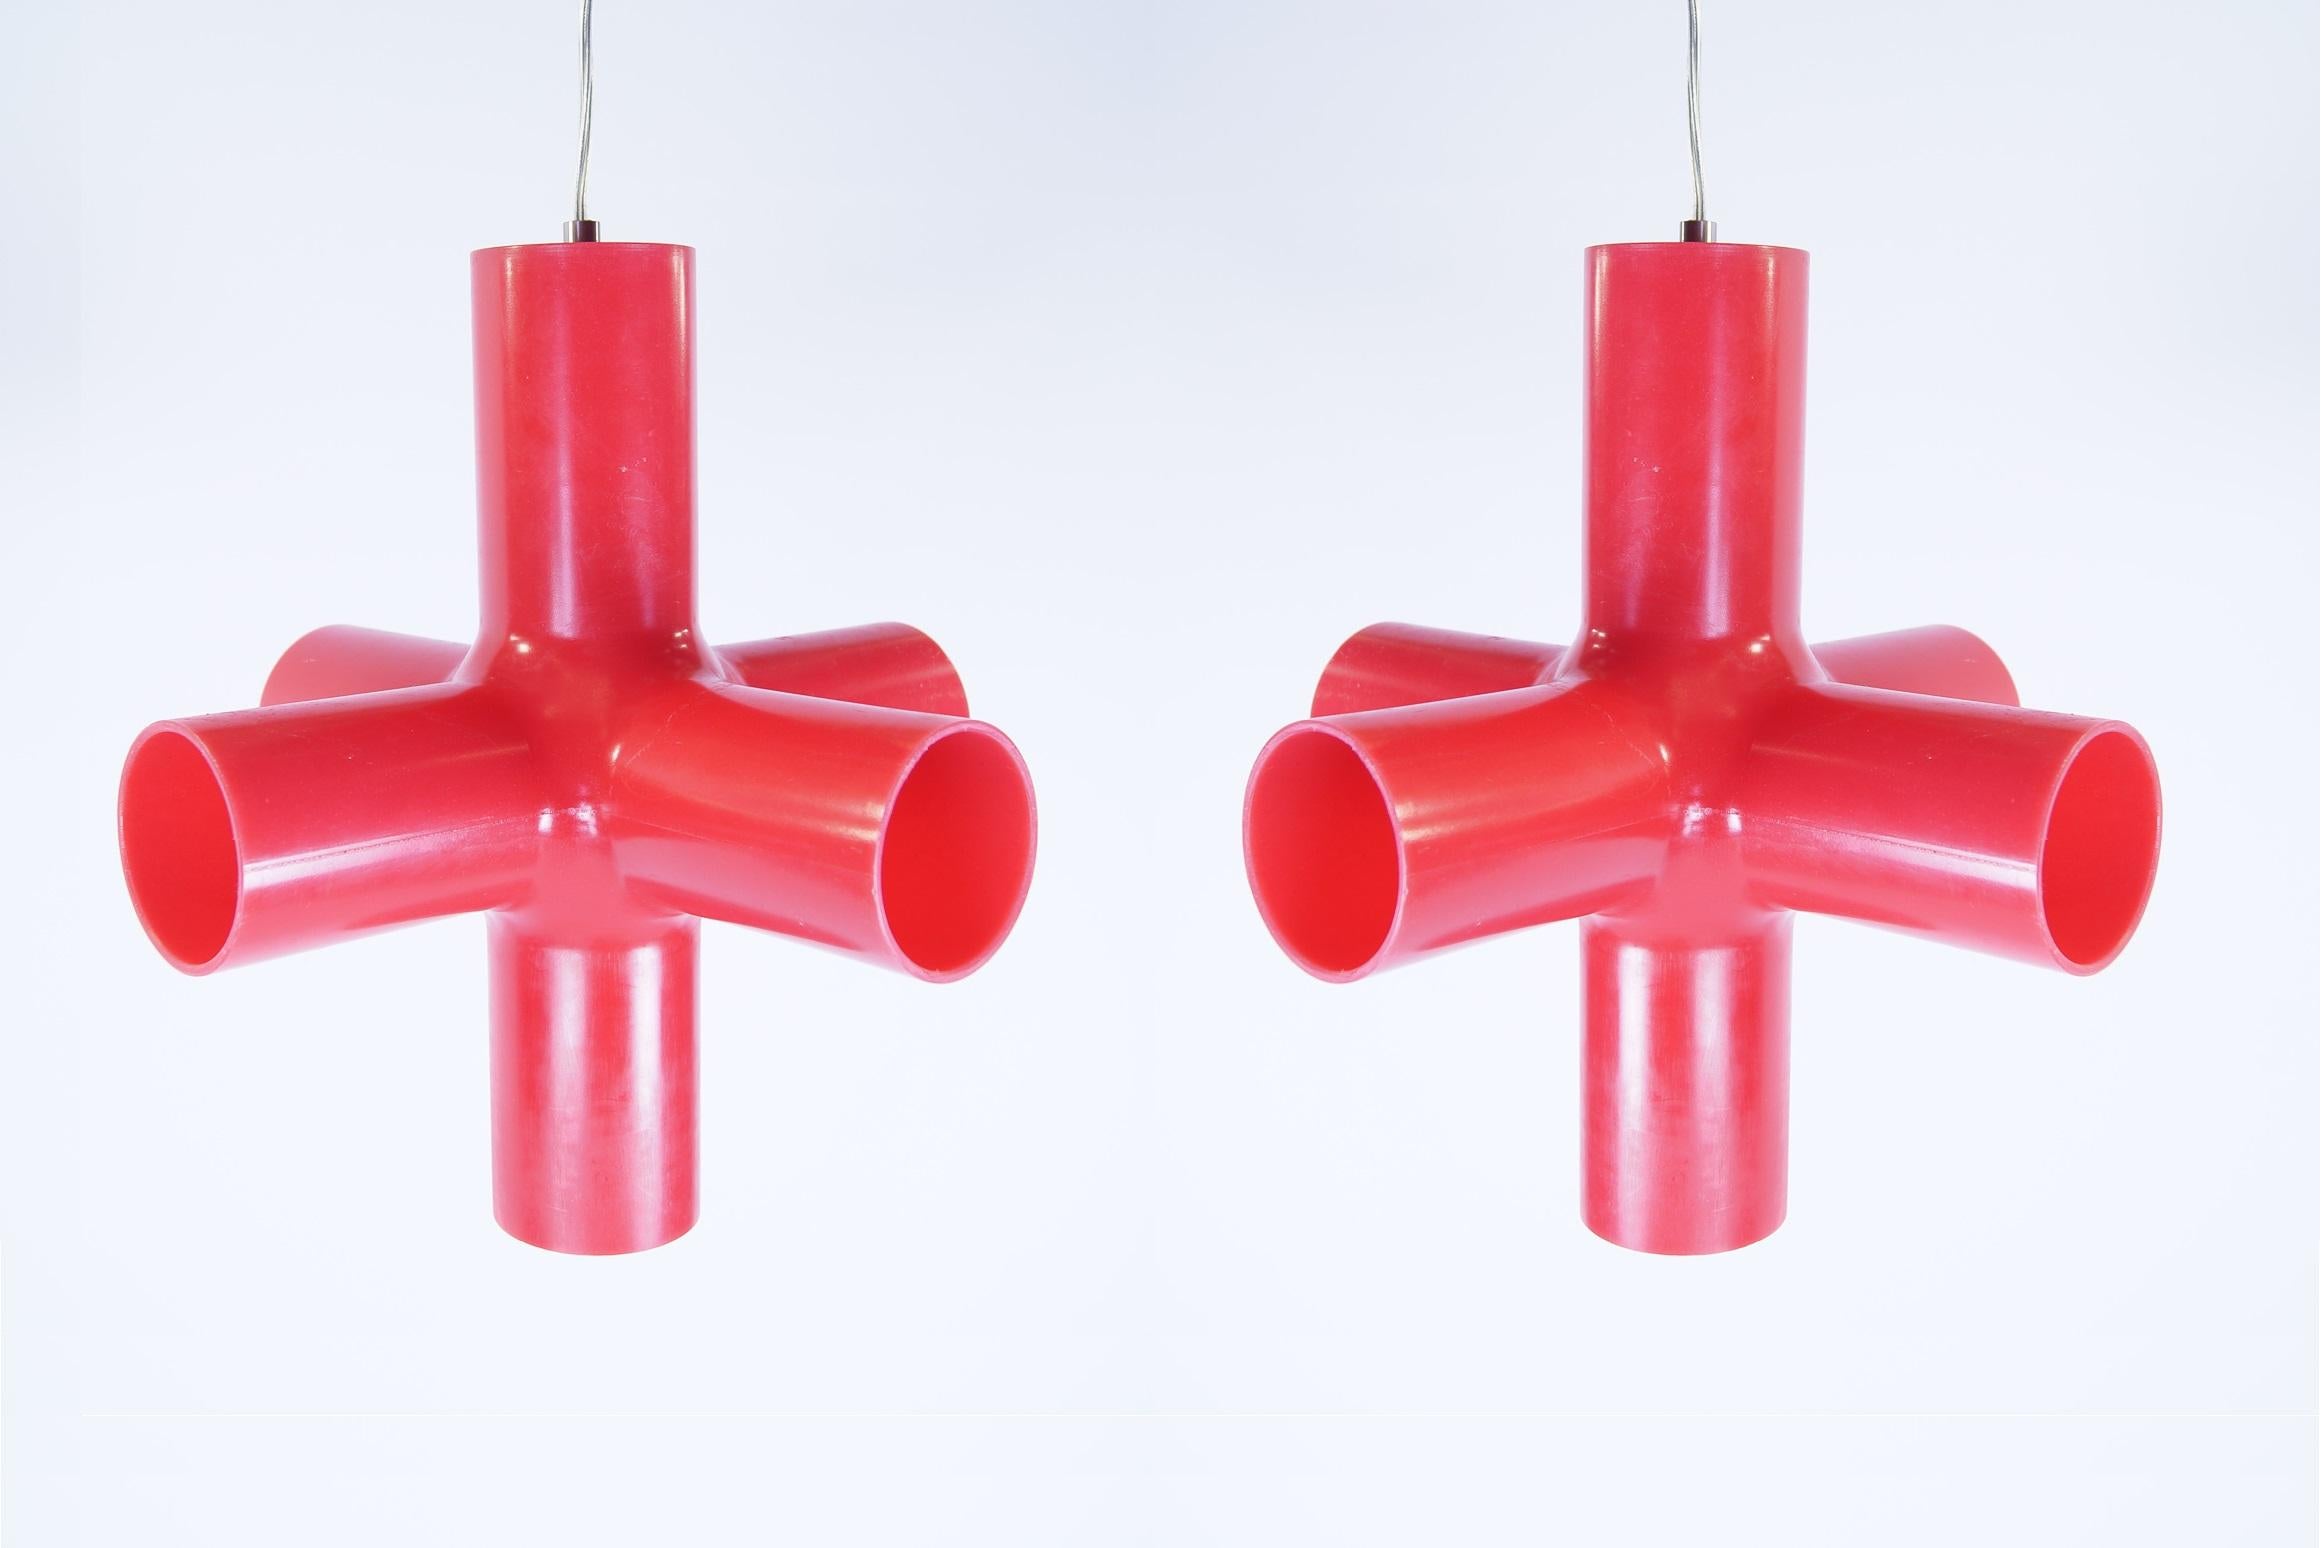 2 x crosslight red. Lamps are in good condition.

The Crosslight is a design for Dark by a Dutch design duo: Jan Melis & Ben Oostrum. The Crosslight is a plastic cross with a light source in the middle, the open sides of the cross give a very